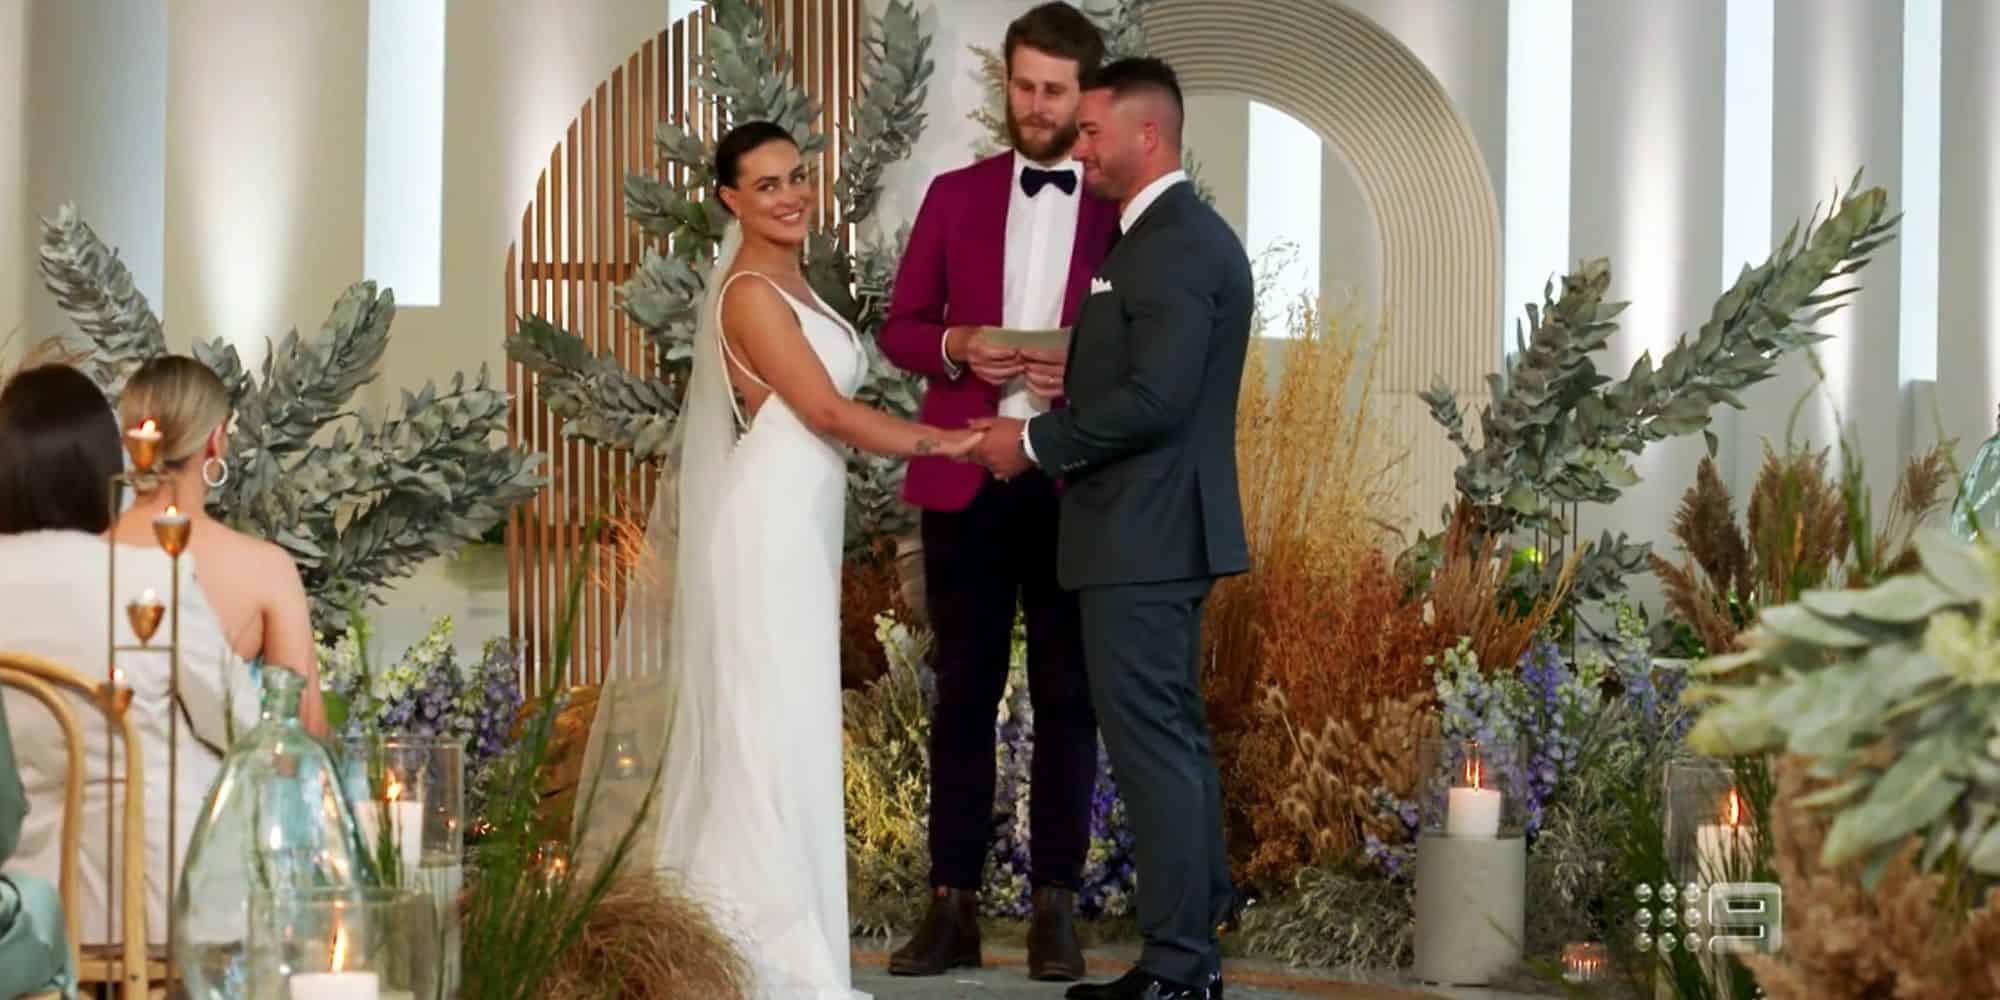 Married at first sight Australia episode 11